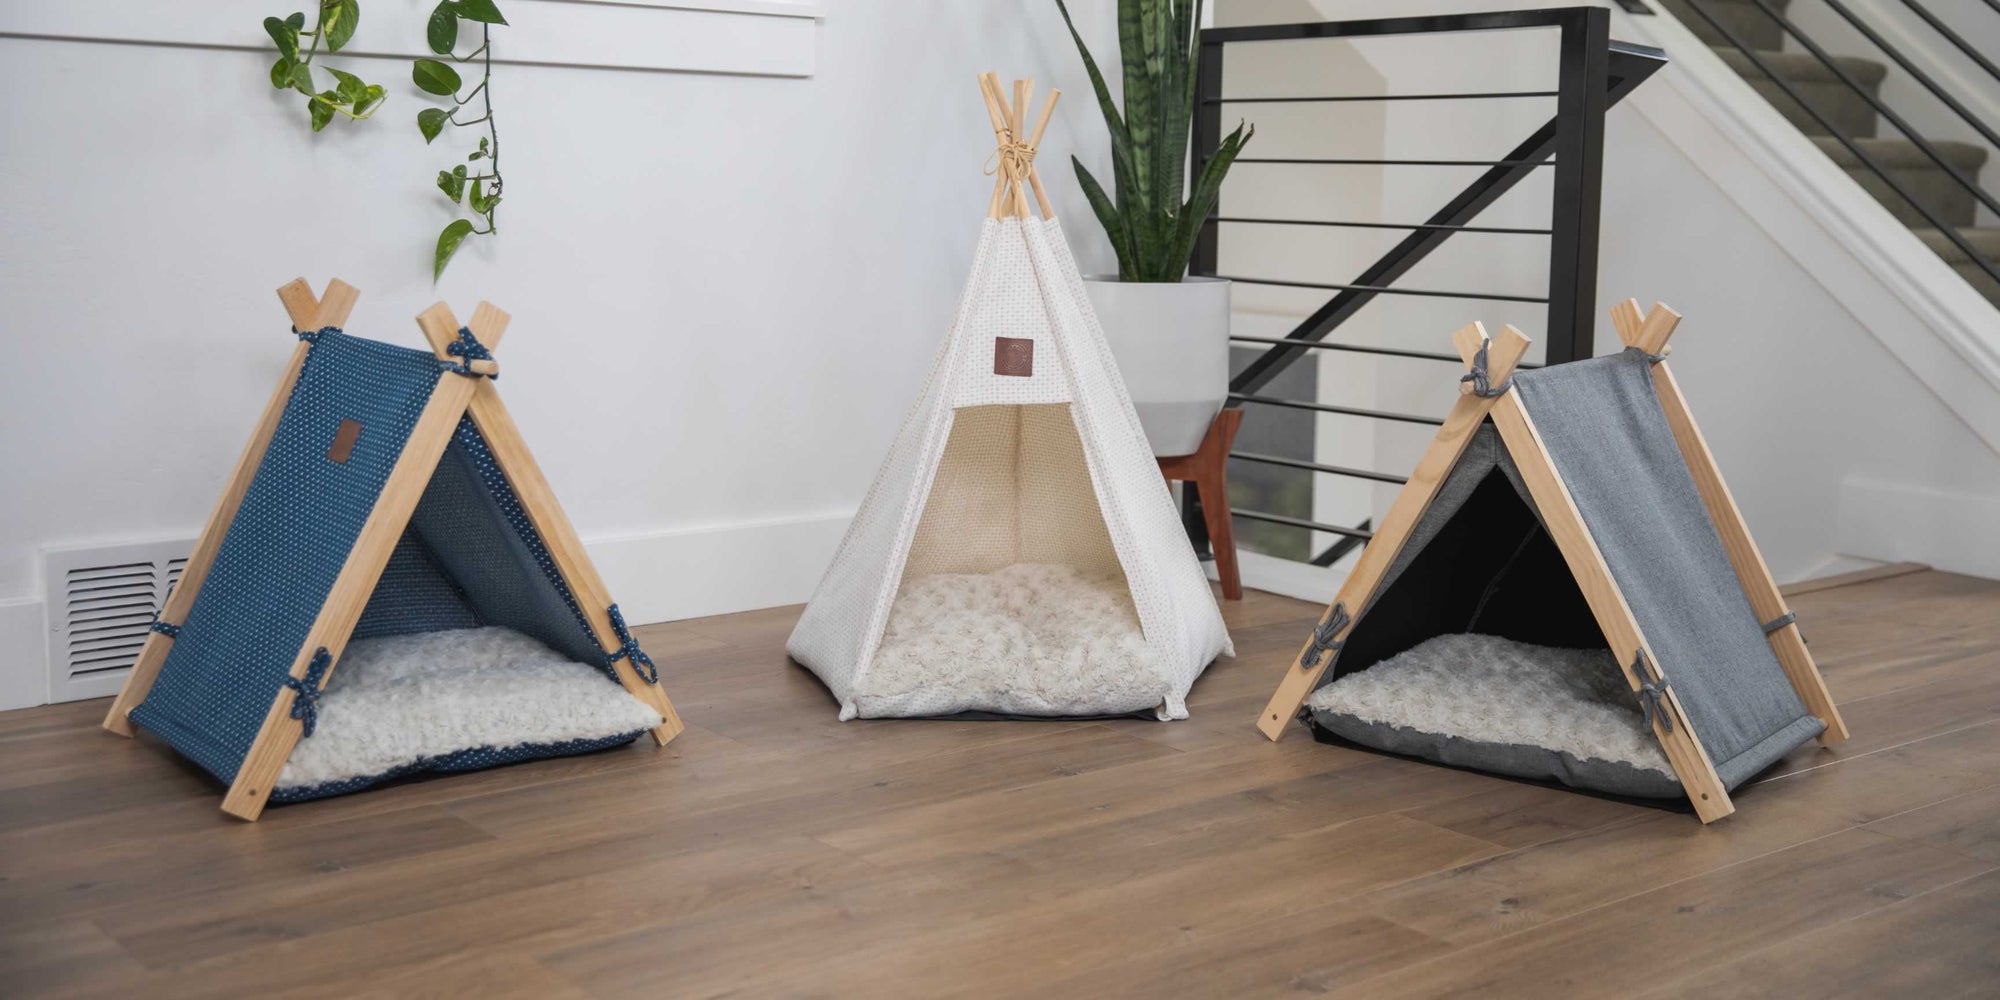 A collection of Pickle & Polly Pet Tents and Pickle & Polly Pet Teepee Beds.